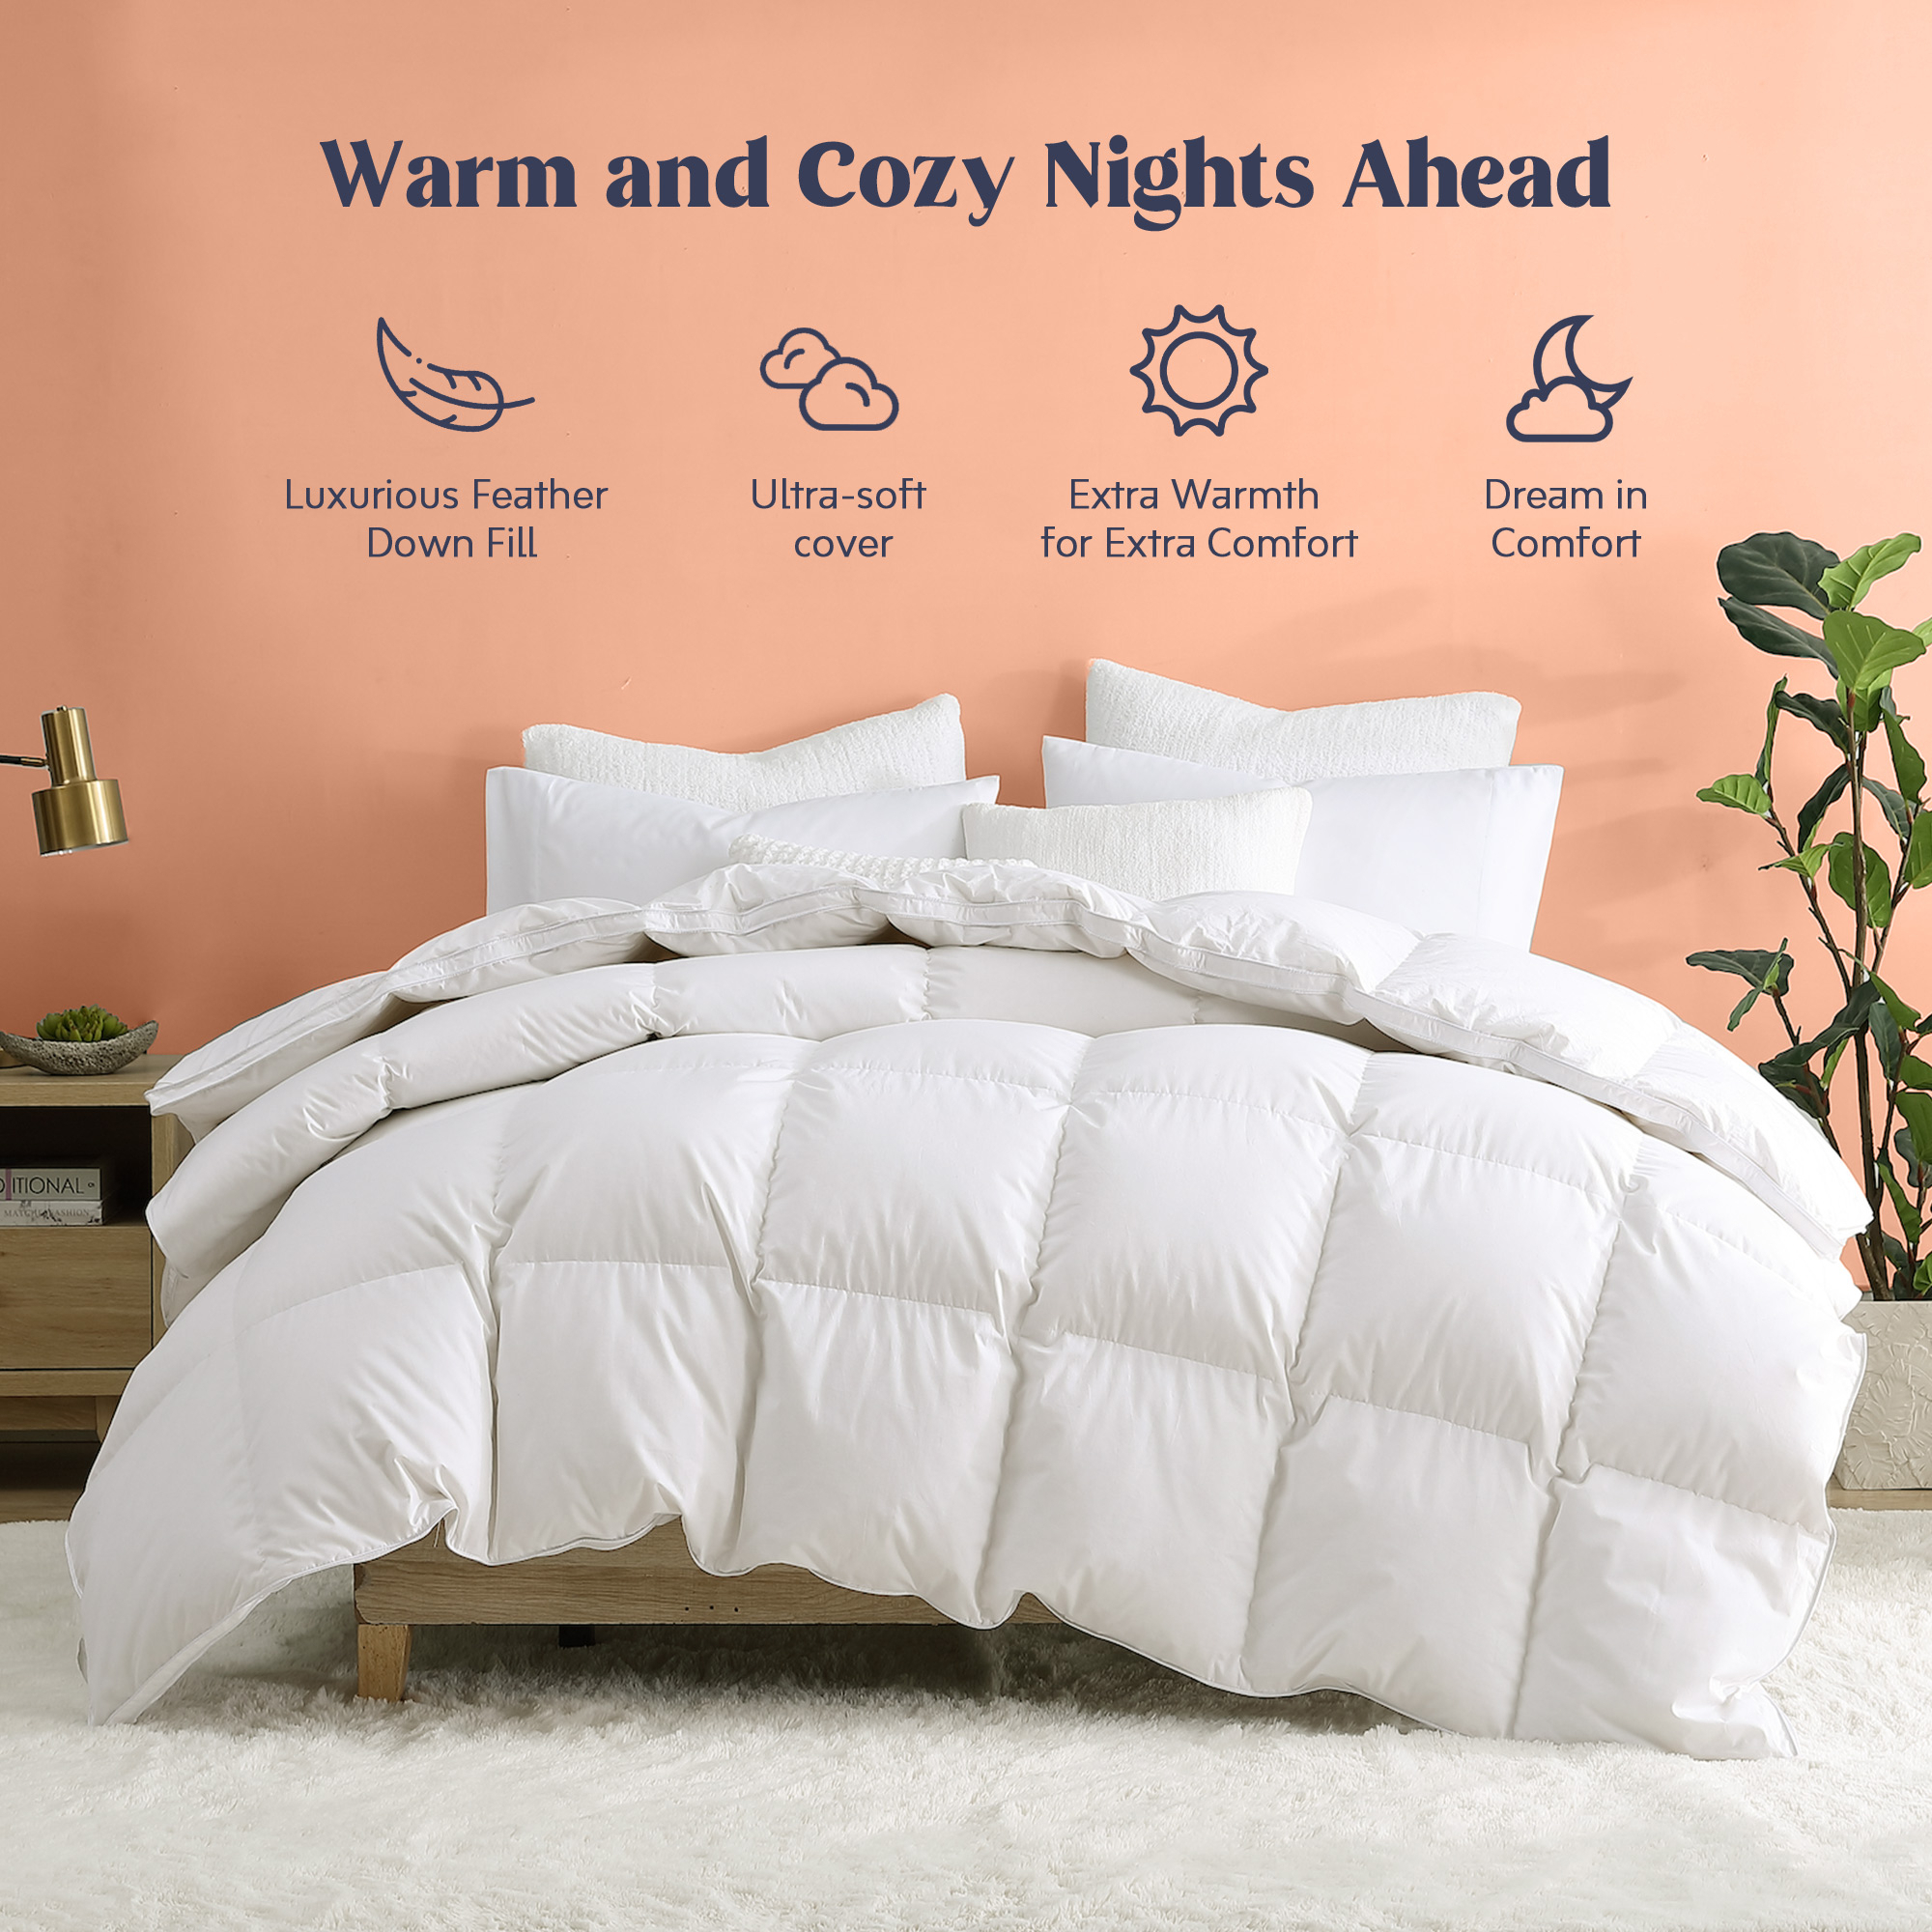 White Goose Down And Ultra Feather Comforter, Machine Washable Duvet Insert - Heavy Weight, King-106*90